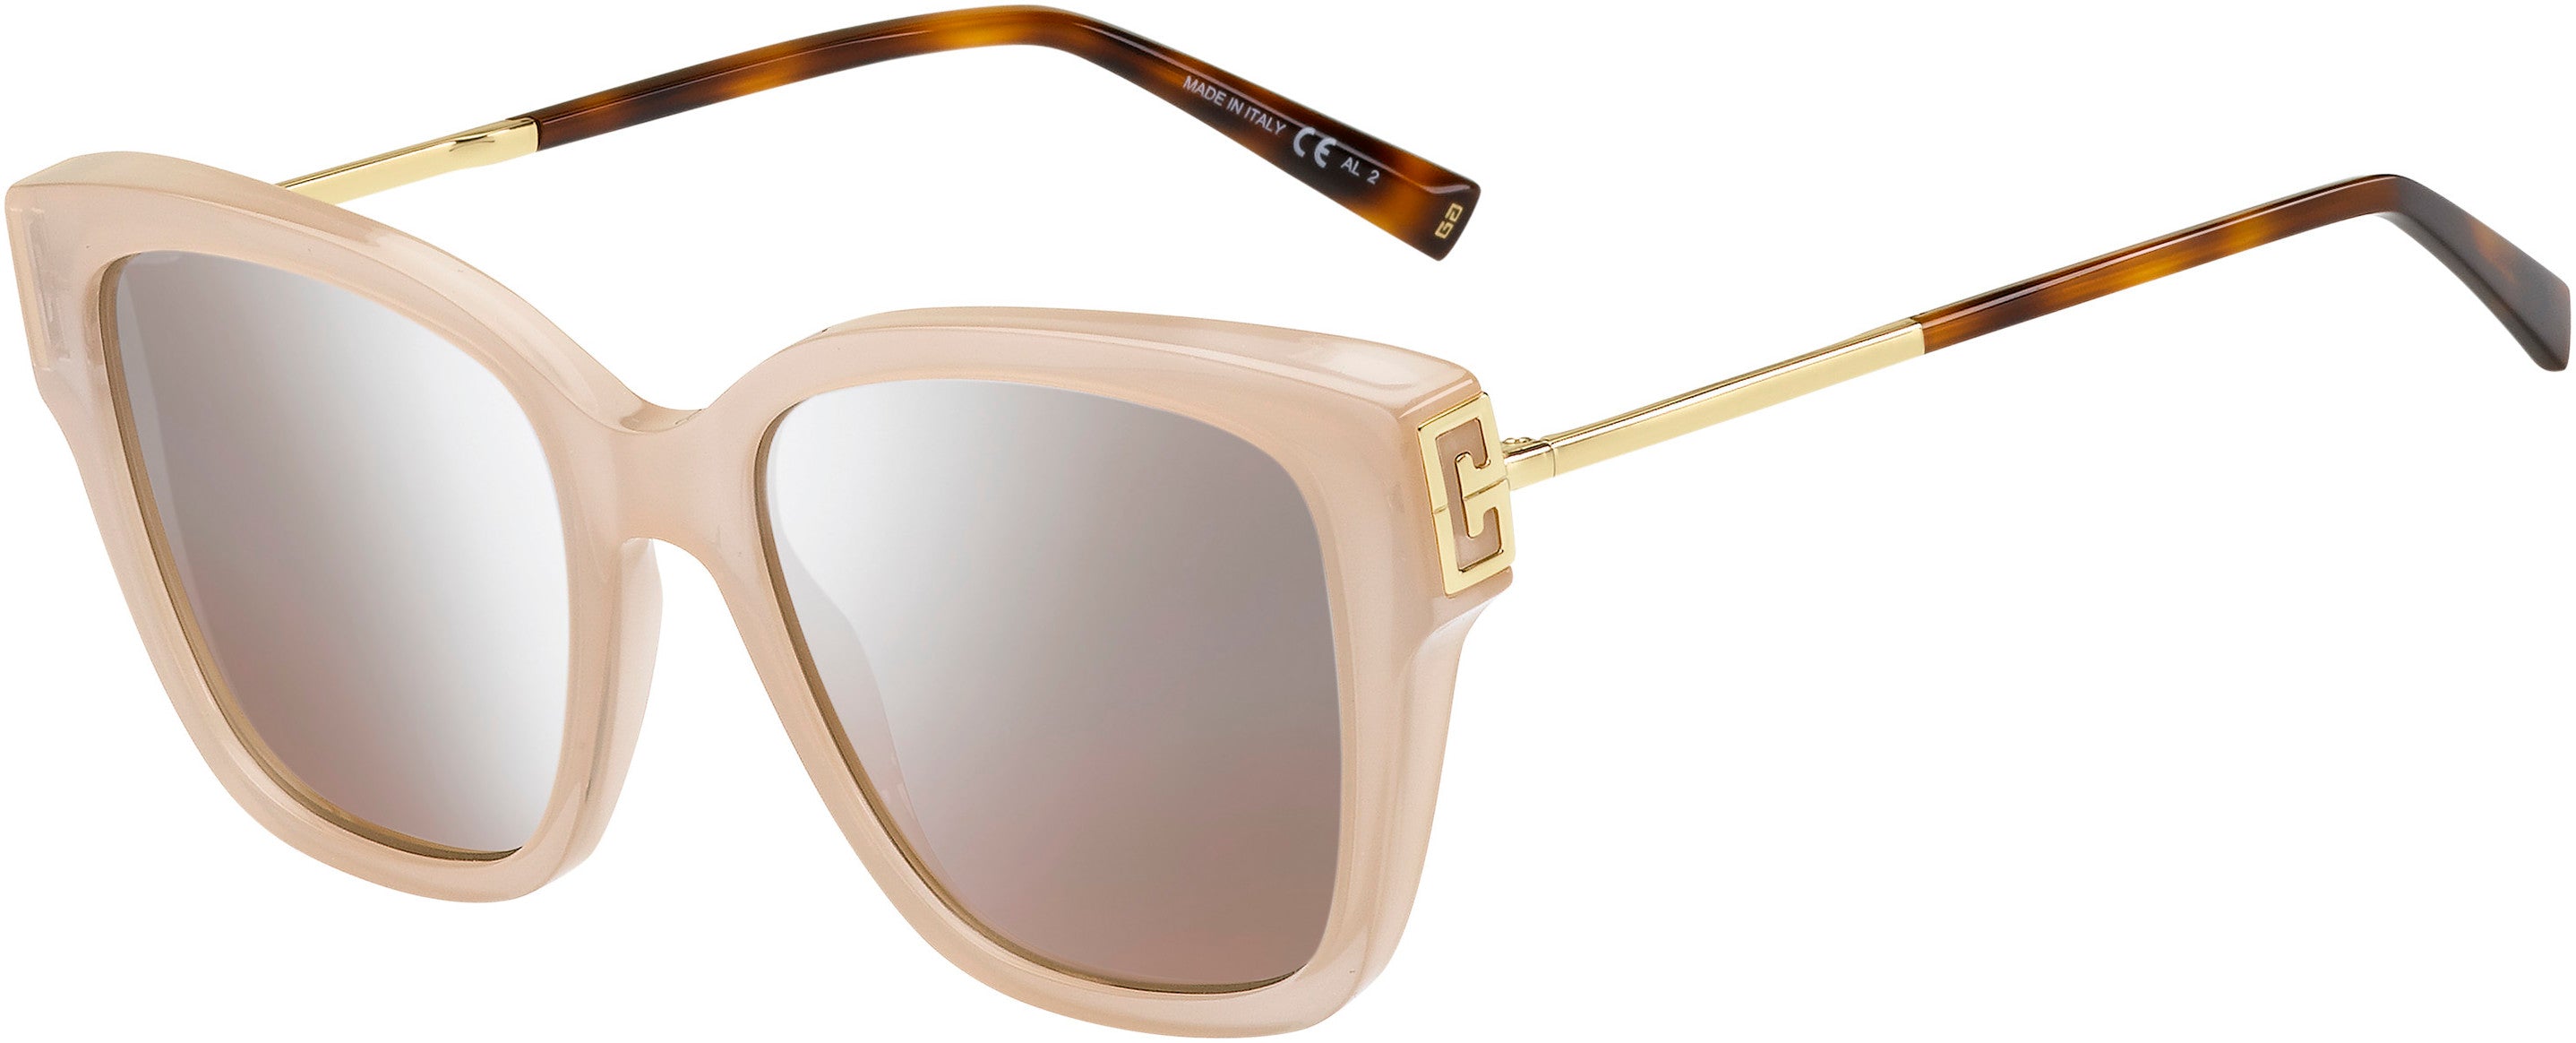  Givenchy 7191/S Square Sunglasses 0FWM-0FWM  Nude (G4 Silver Mirror Shaded Brown)